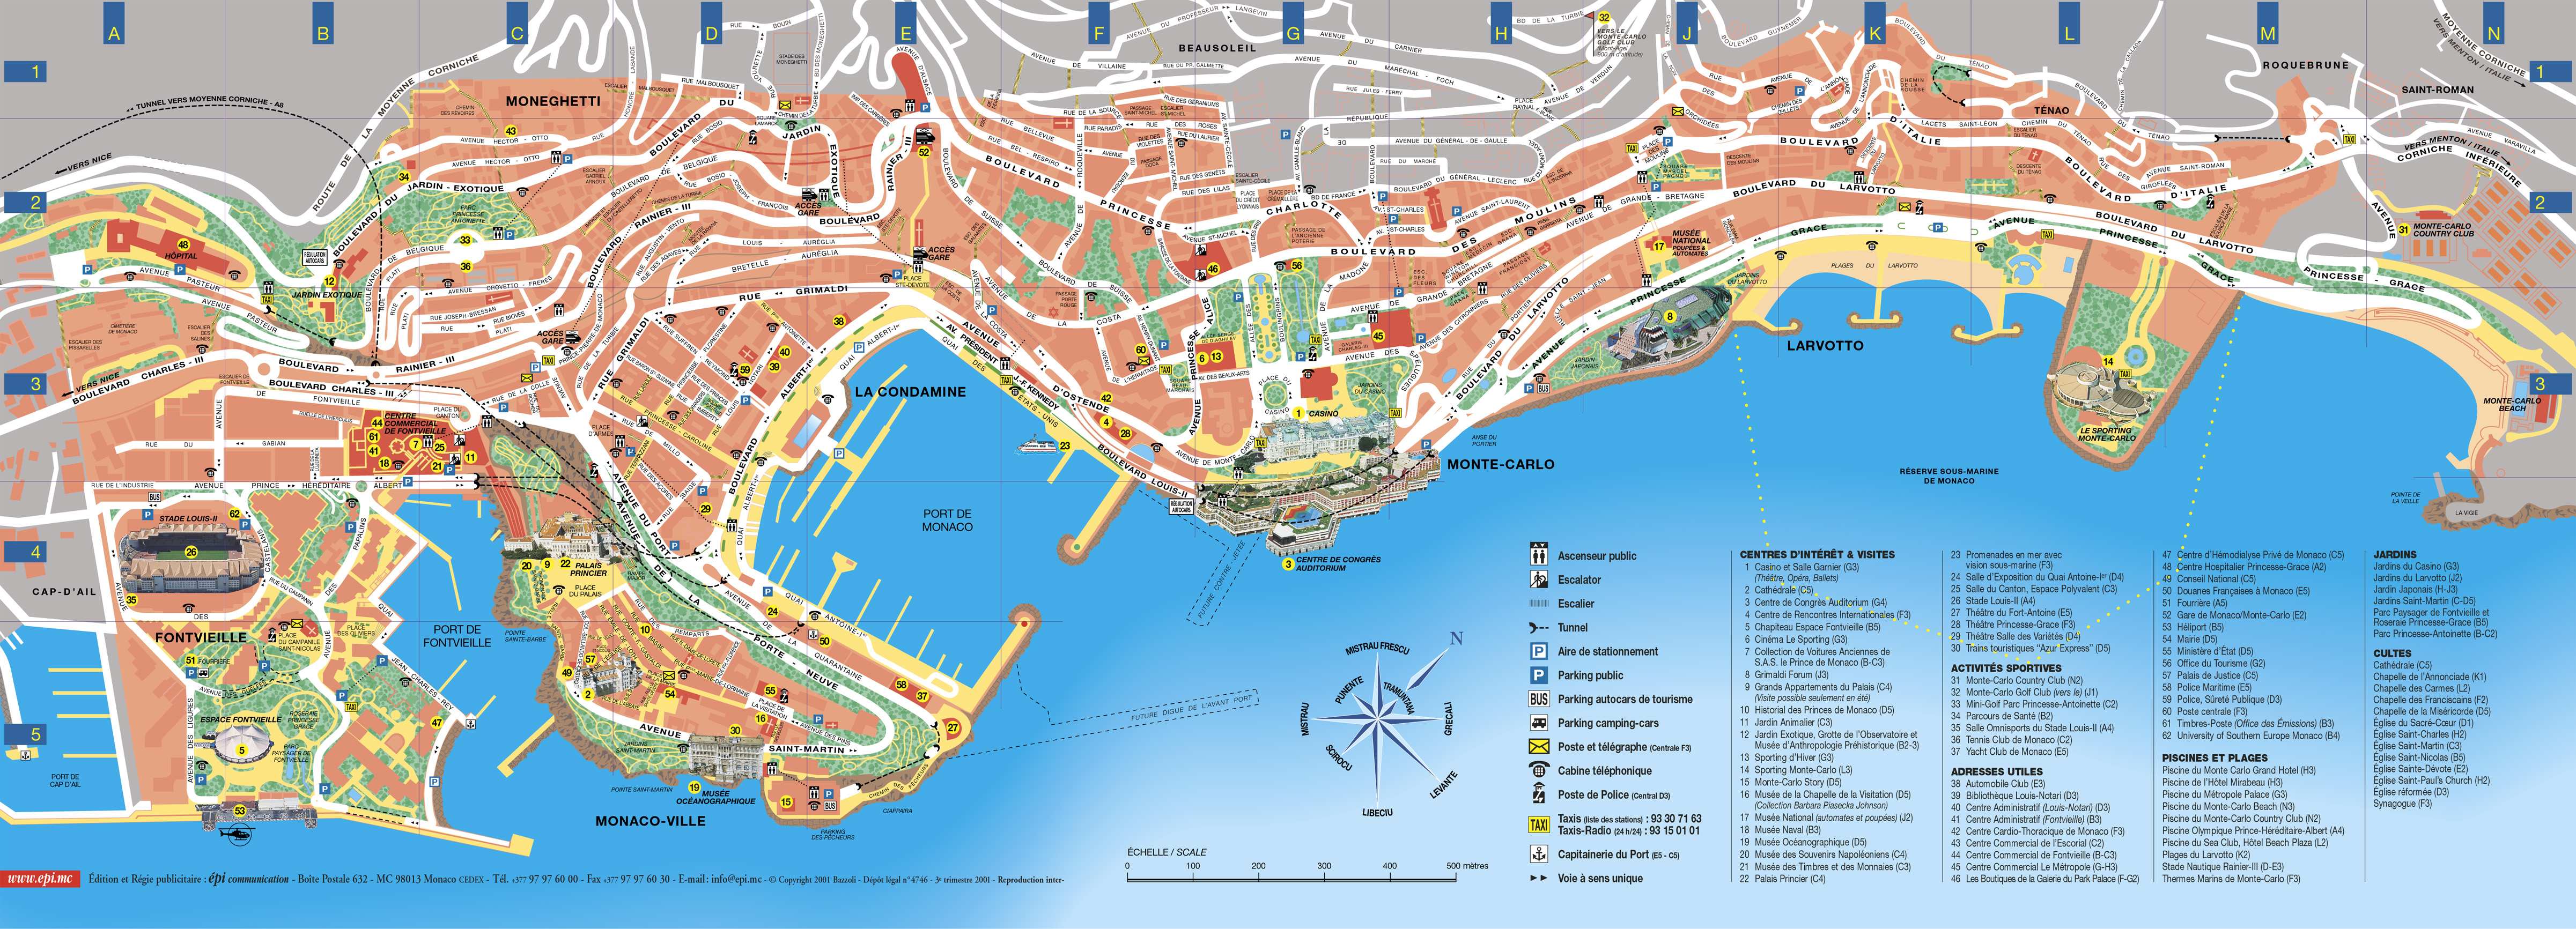 Large Monte Carlo Maps for Free Download and Print High